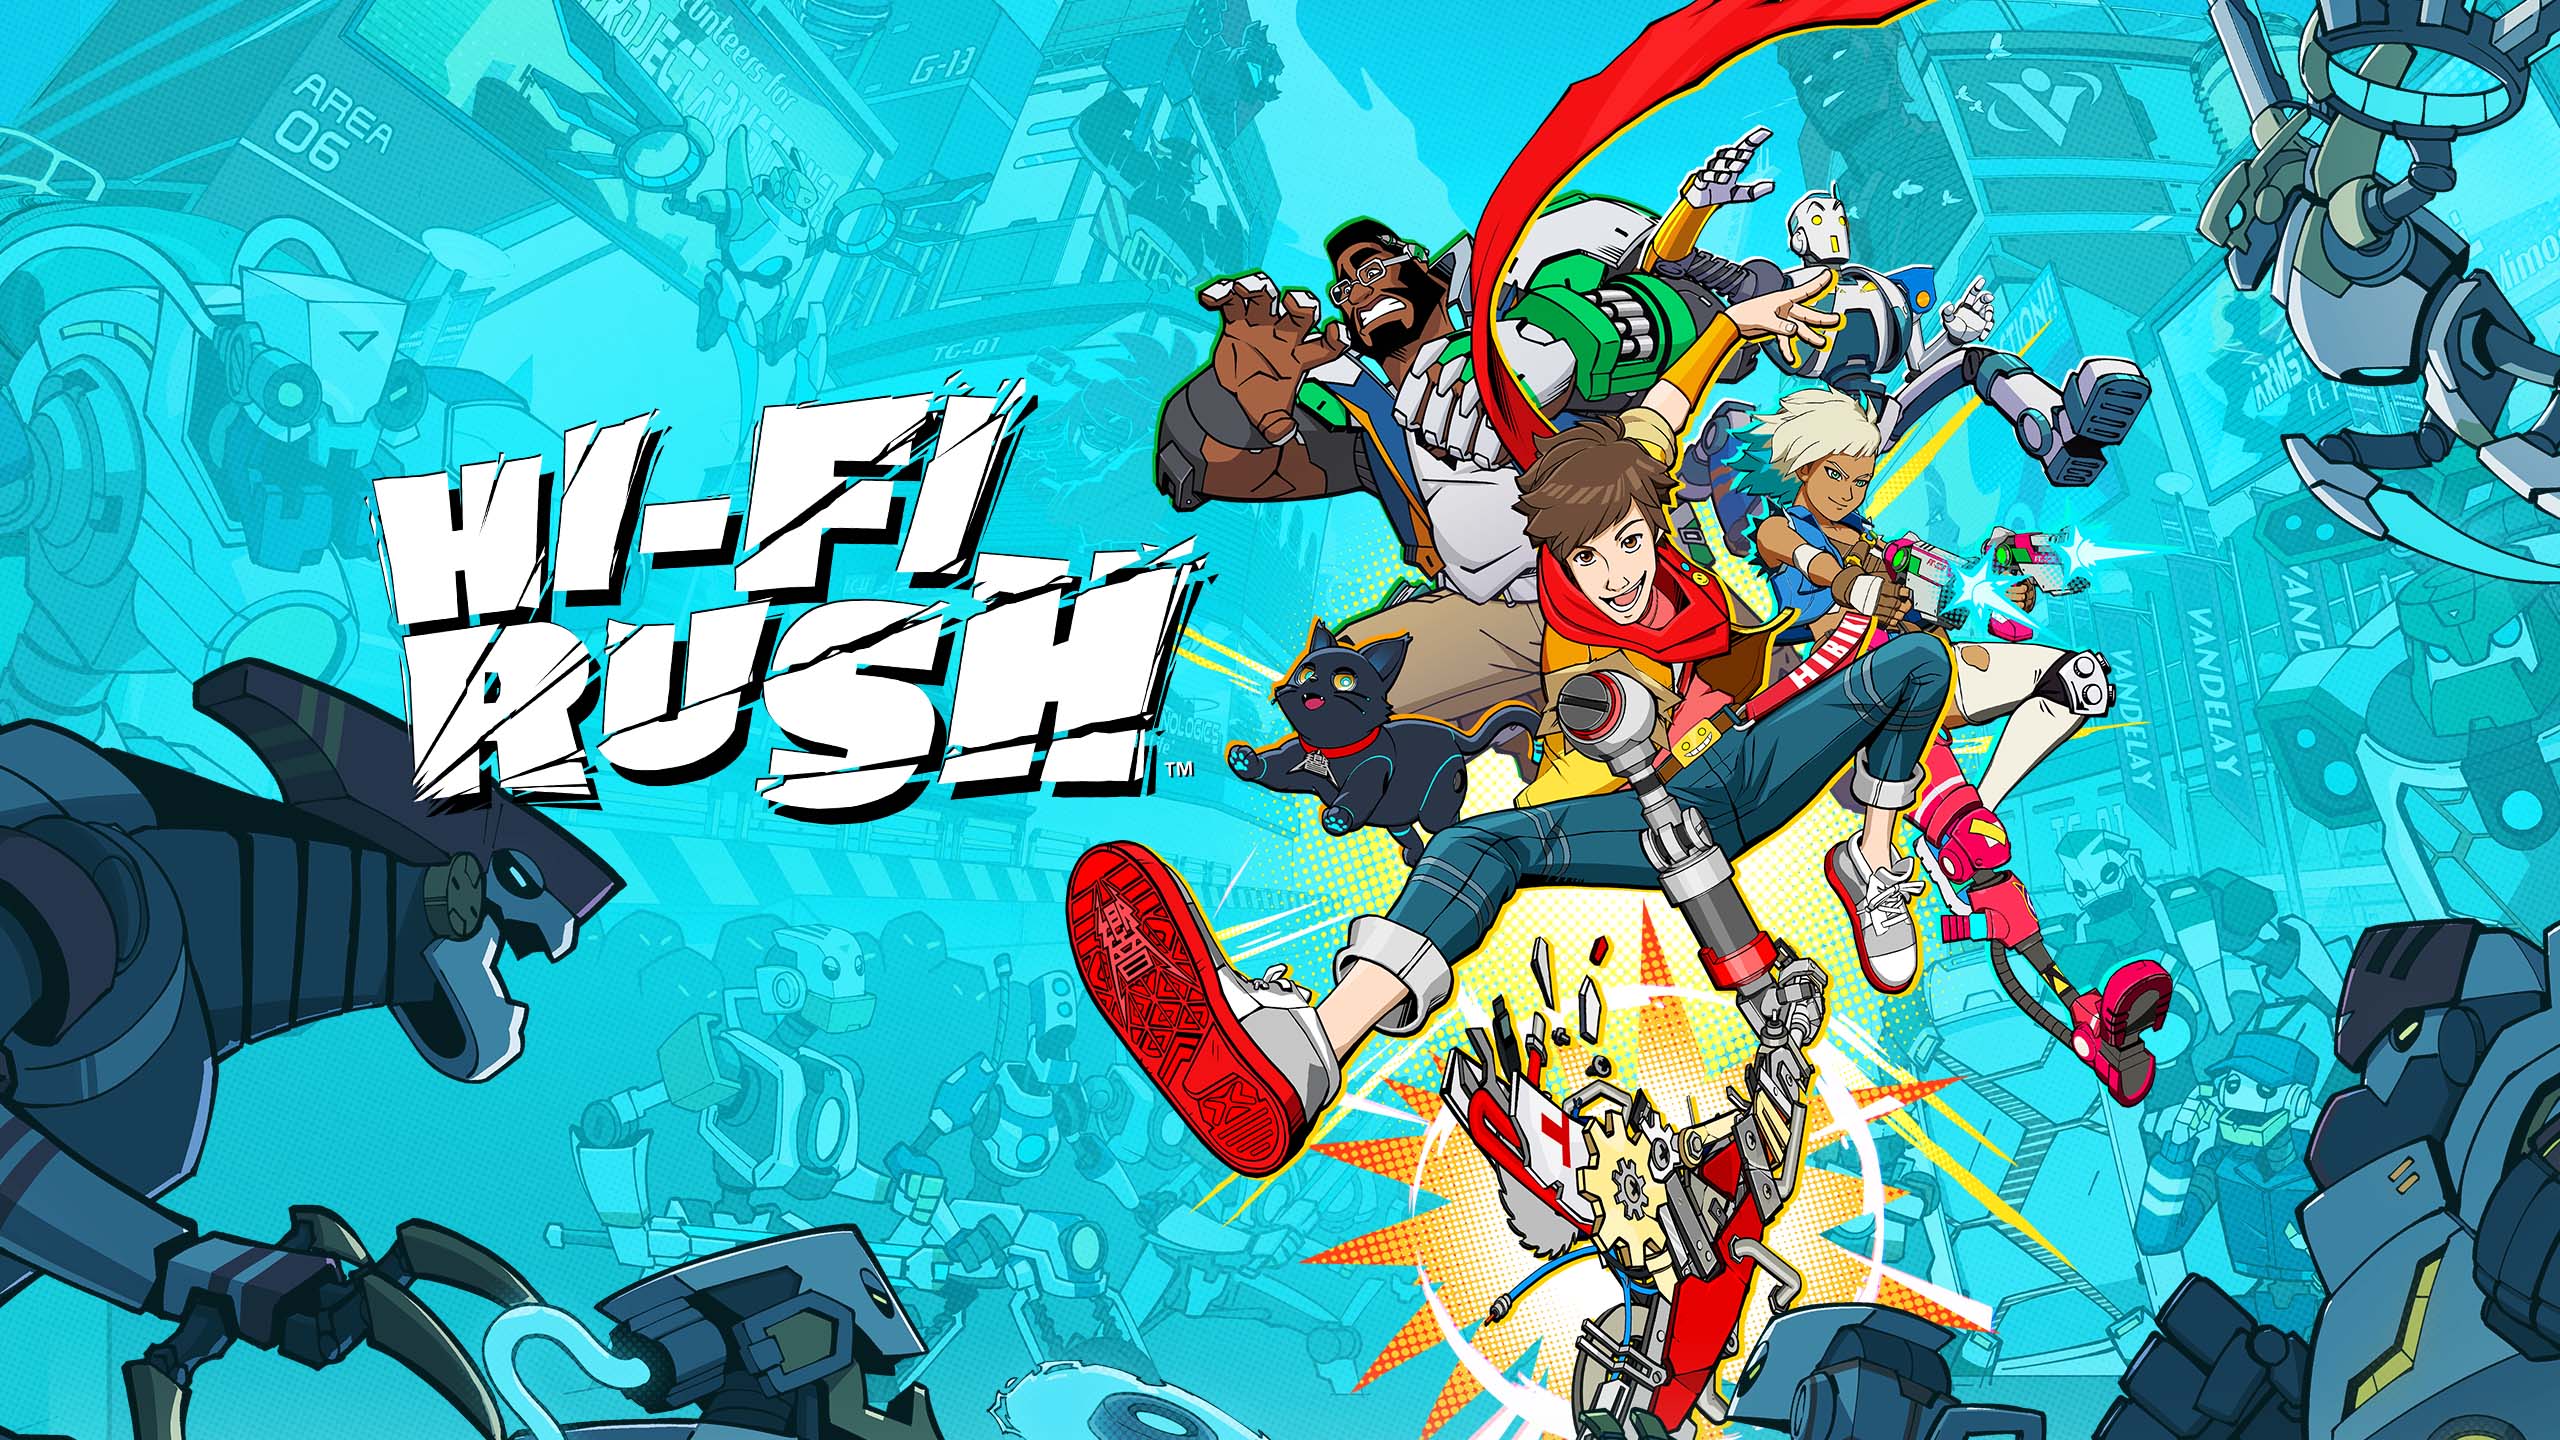 New confirmation of the rumours that Hi-Fi Rush will appear on Nintendo Switch and PlayStation